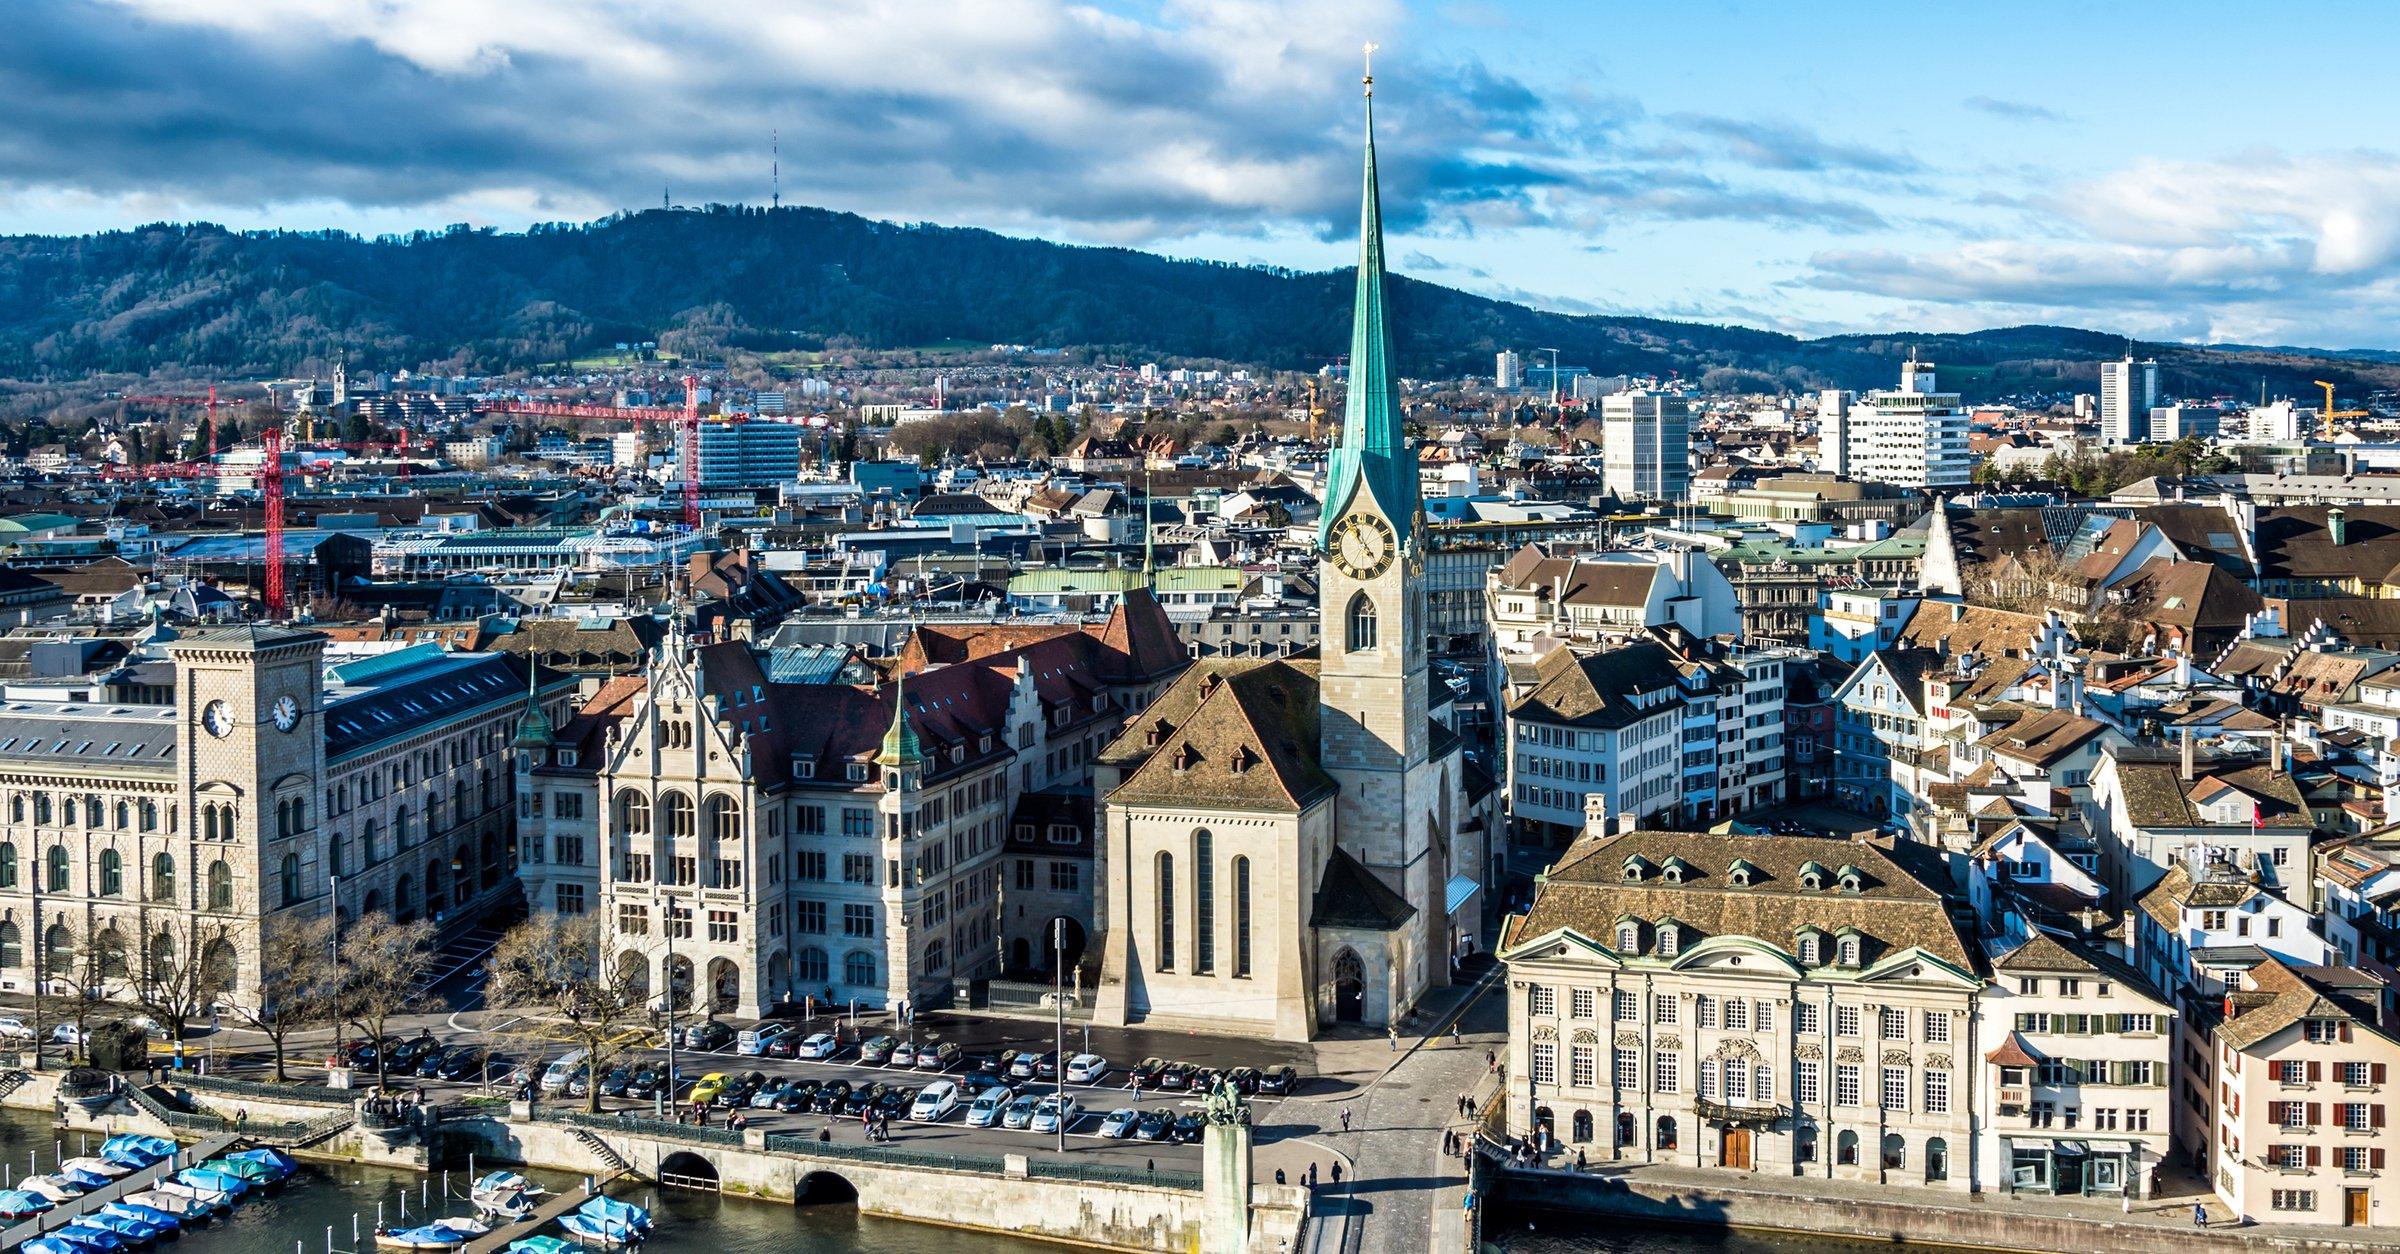 A Future-Oriented City: Why To Choose Zurich To Work Or Study